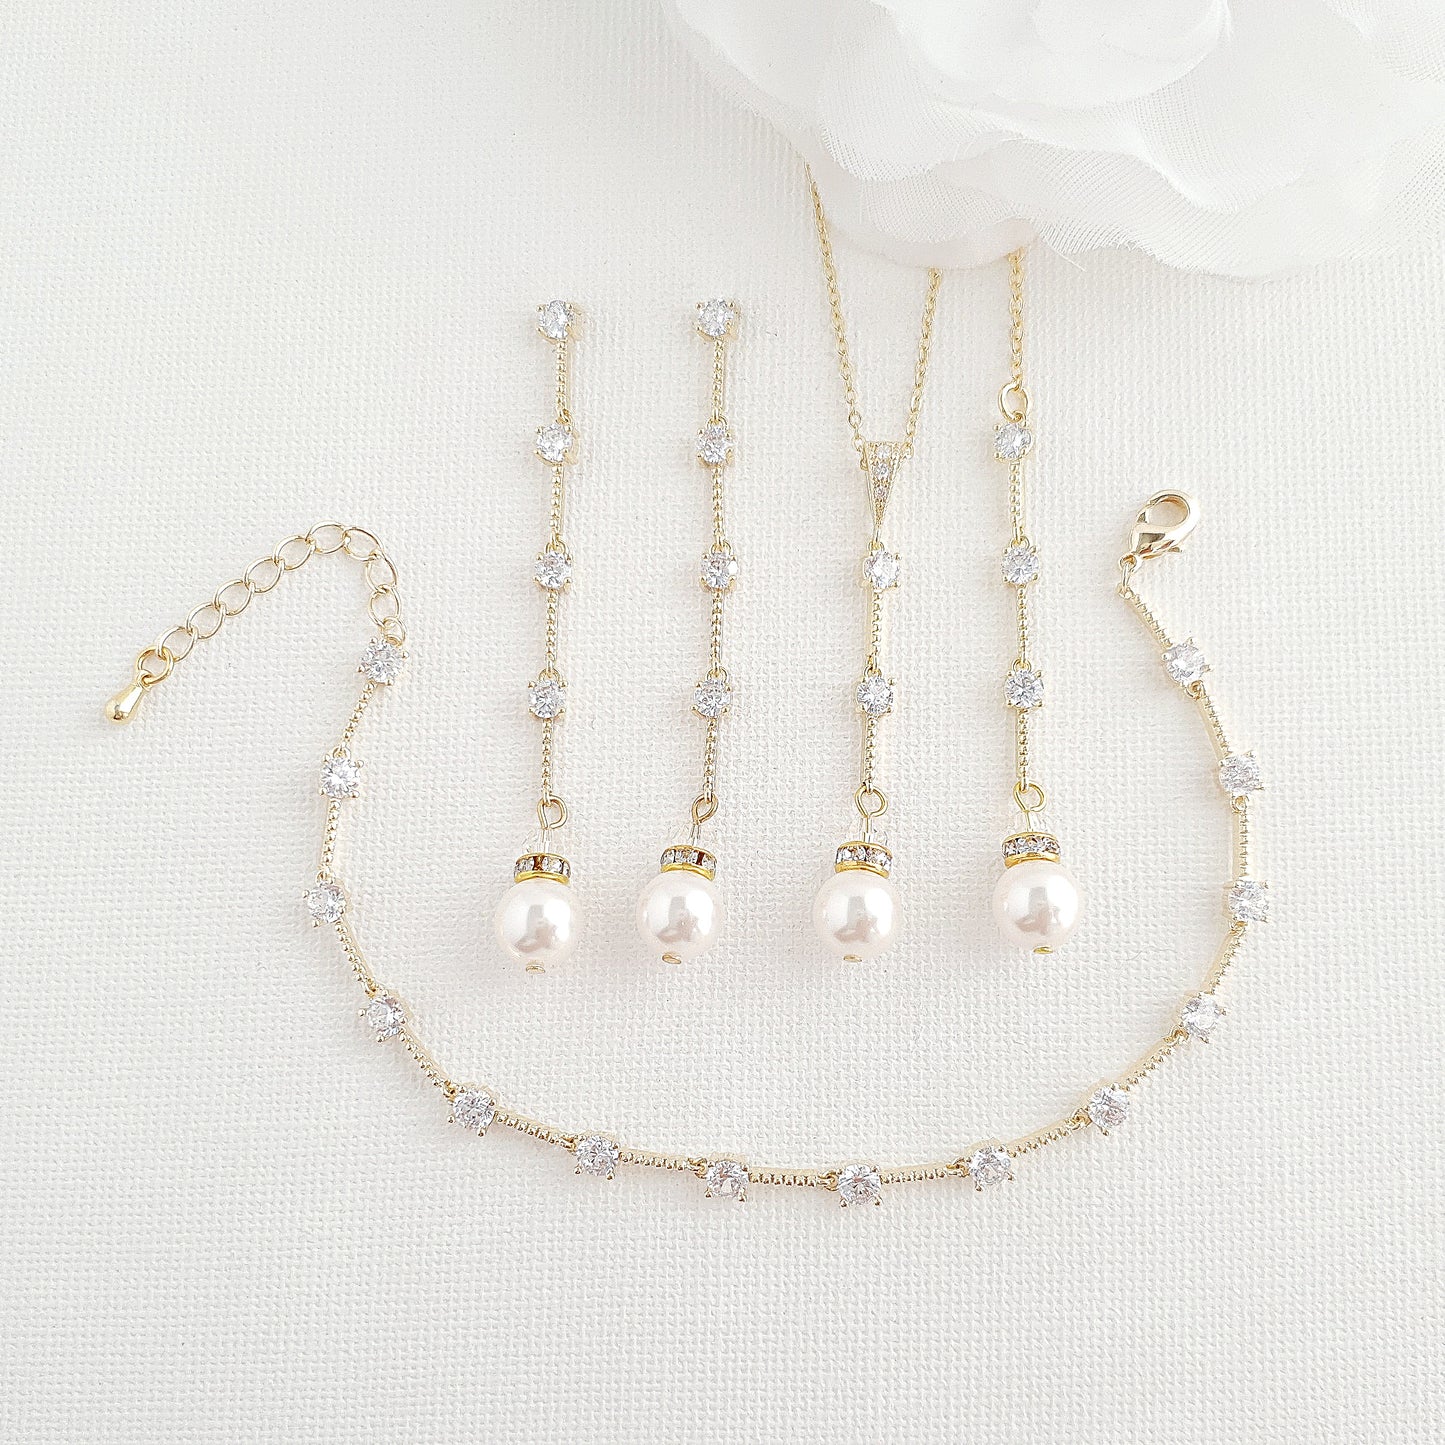 Gold Jewelry Set With Pearl Drop Earrings Necklace Bracelet-Ginger